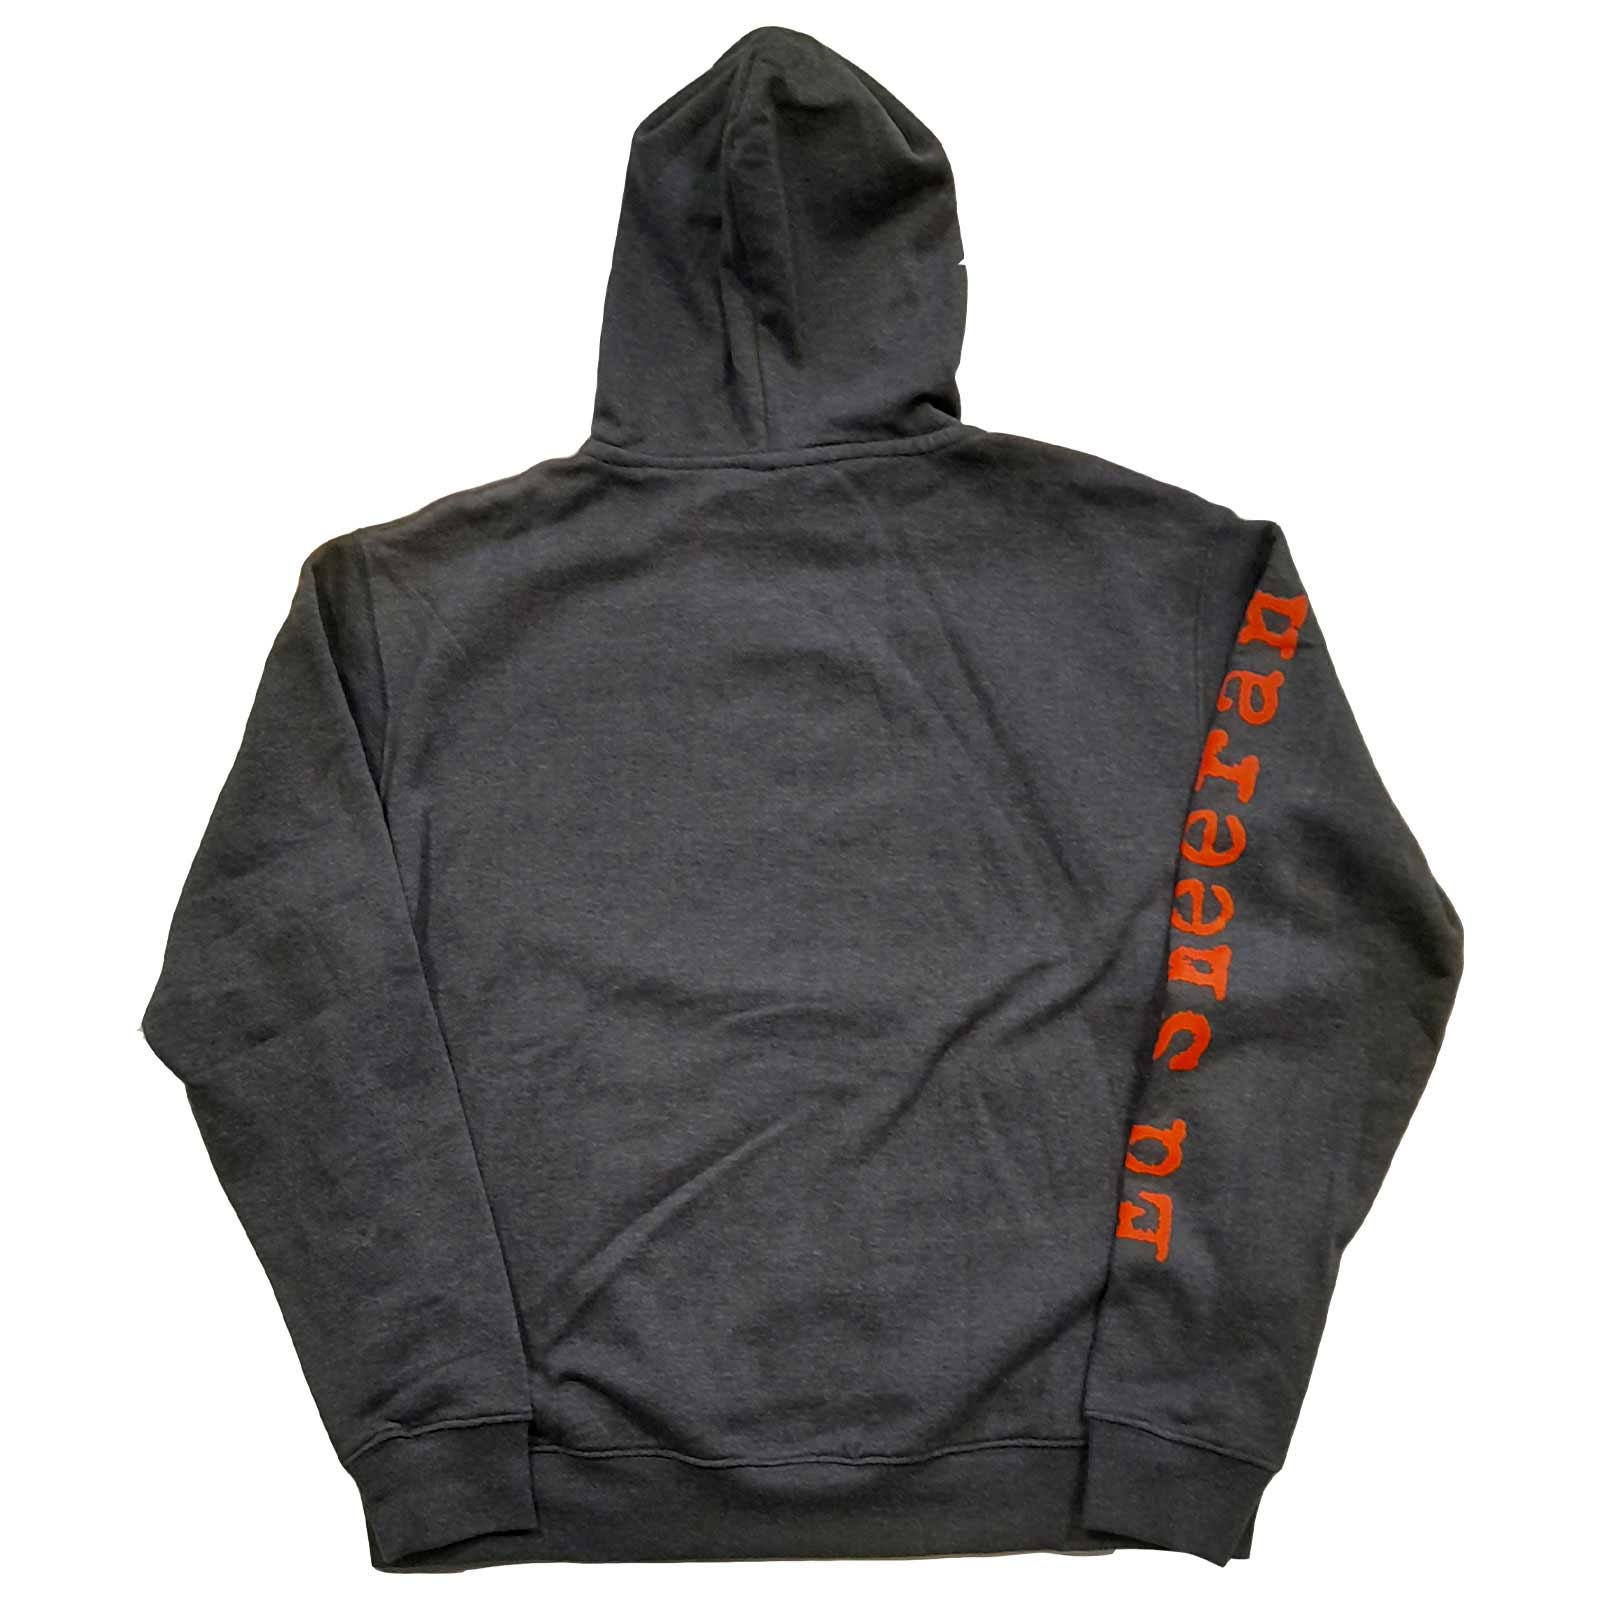 Ed Sheeran Hoodie - Equals Logo   - Unisex Official Licensed Design - Worldwide Shipping